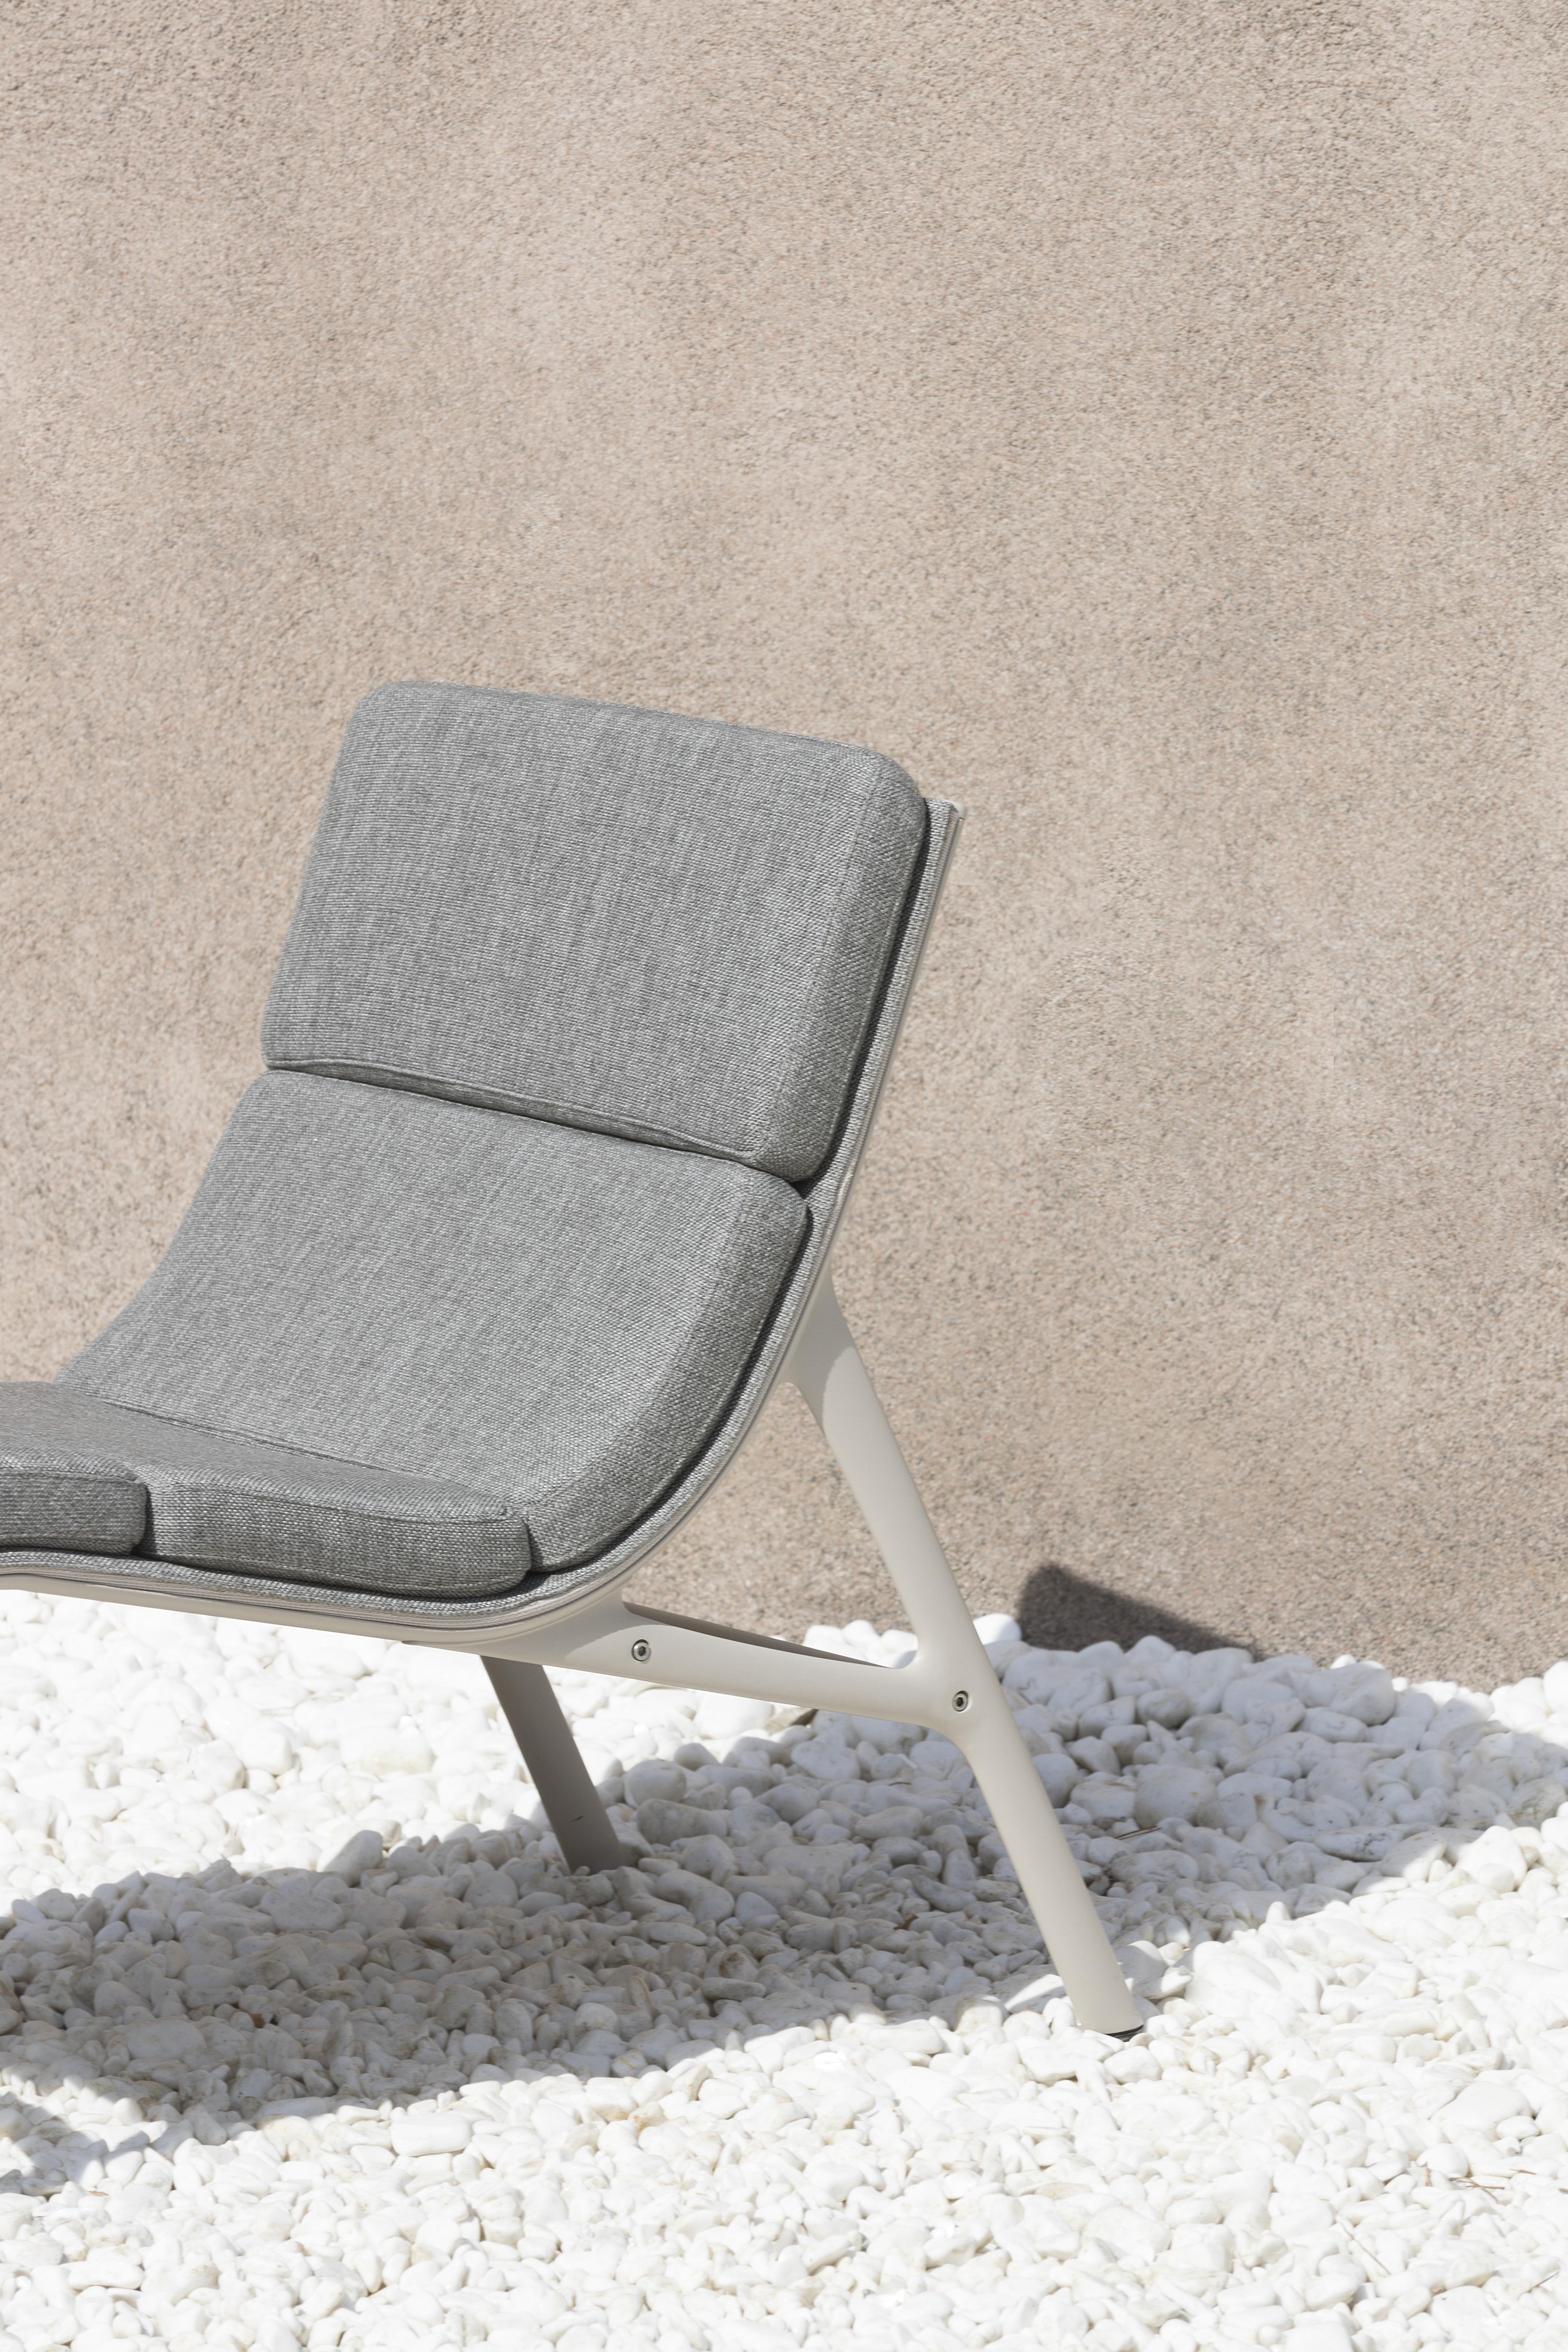 Alias 462 Armframe Soft Outdoor Chair in White Mesh/Grey Seat & Lacquered Frame For Sale 1